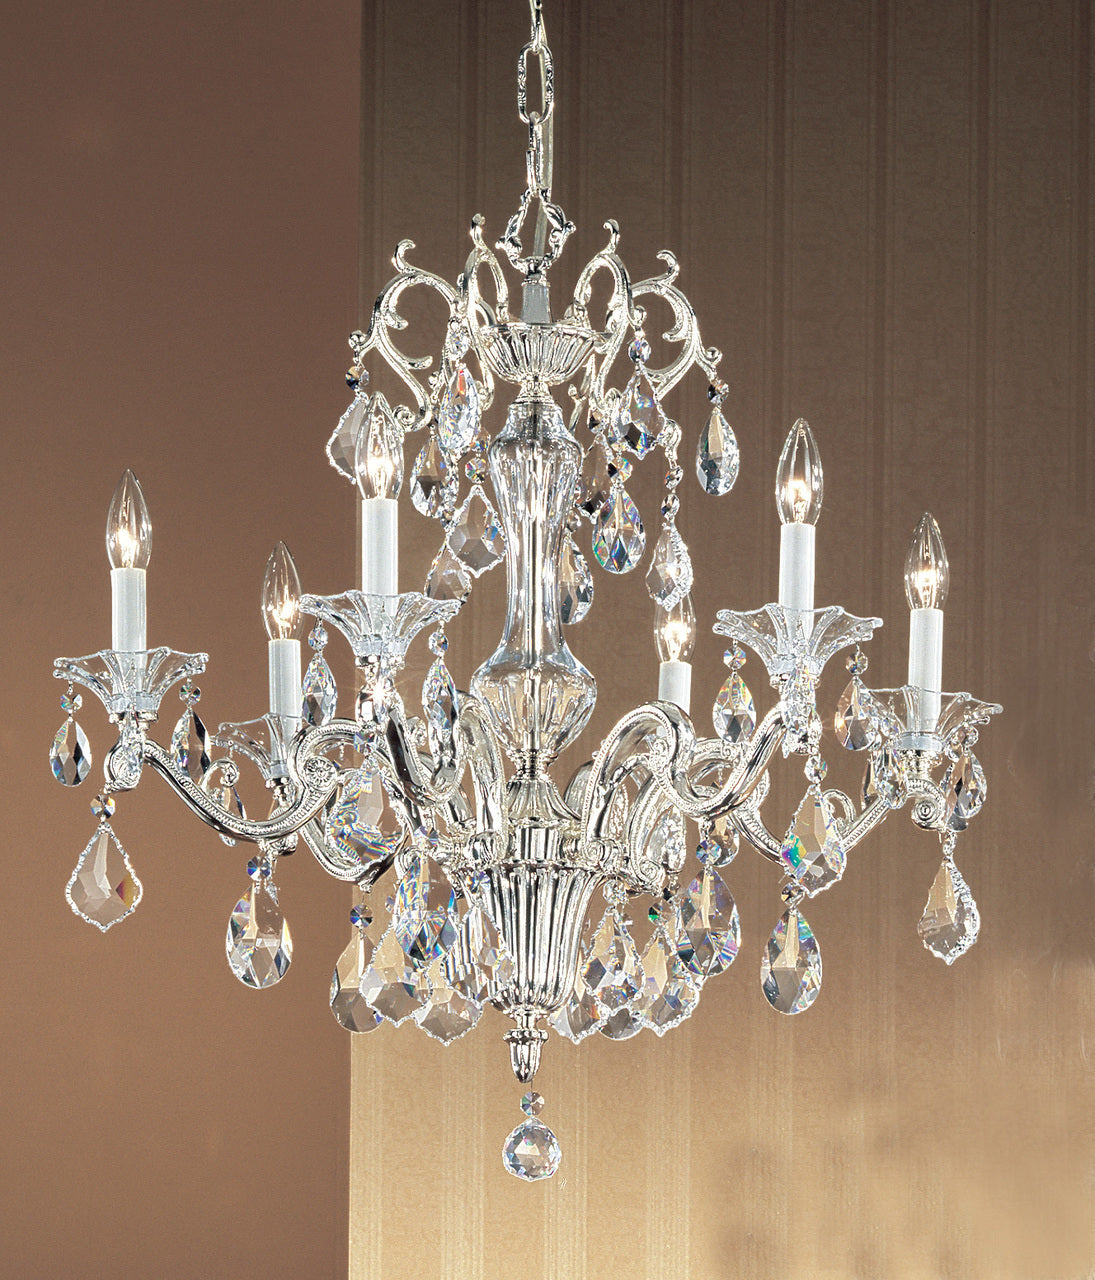 Classic Lighting 57106 SP C Via Firenze Crystal Chandelier in Silver (Imported from Spain)